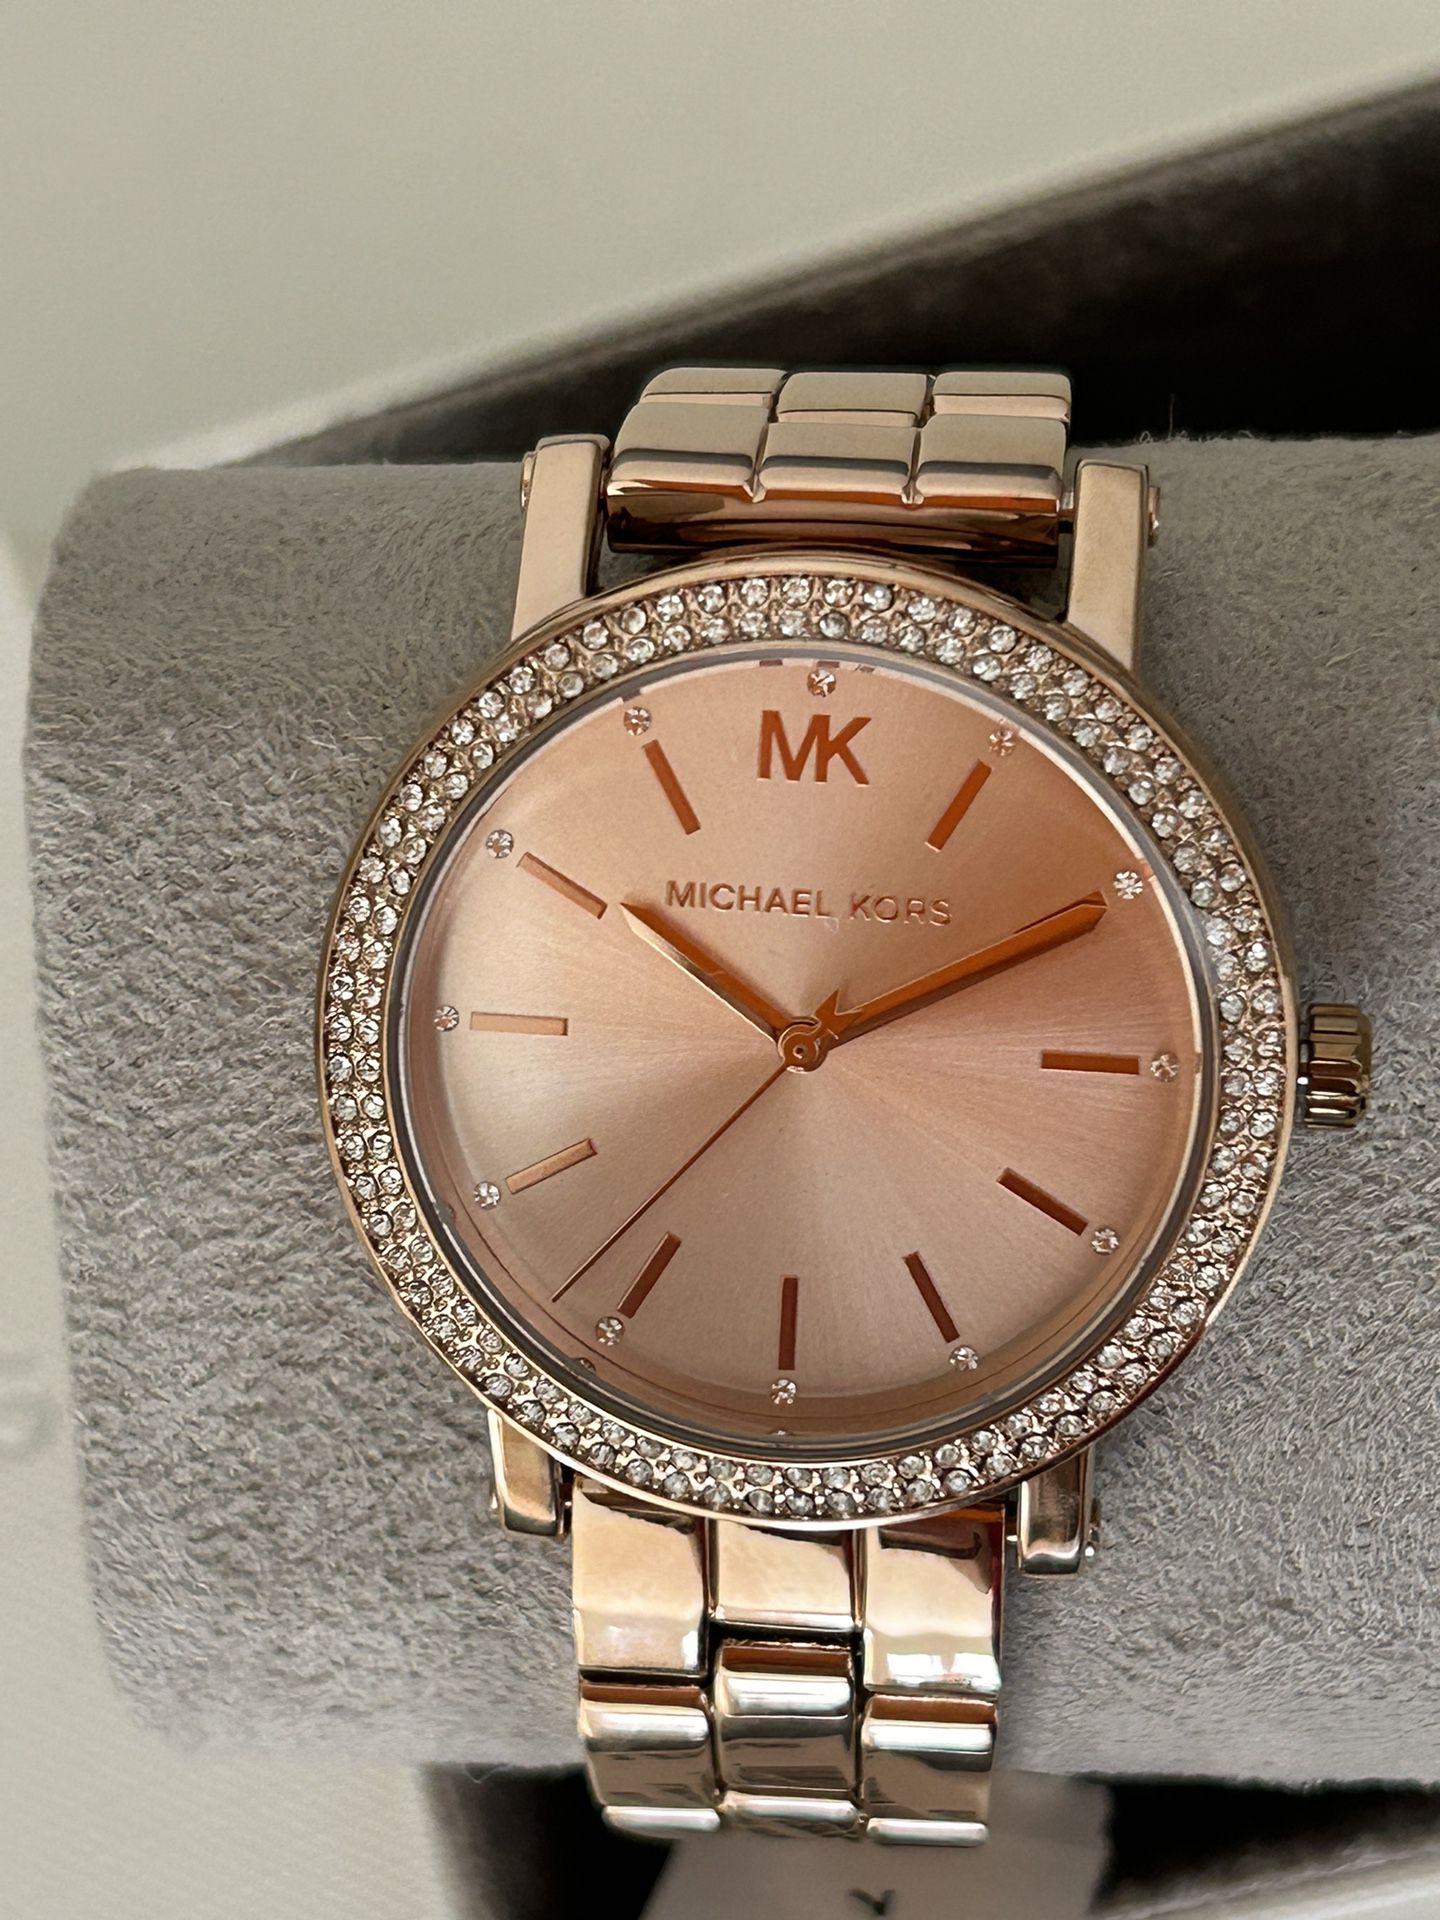 Authentic Michael Kors Rose Gold Luxury Watch (Brand New With Tags) 